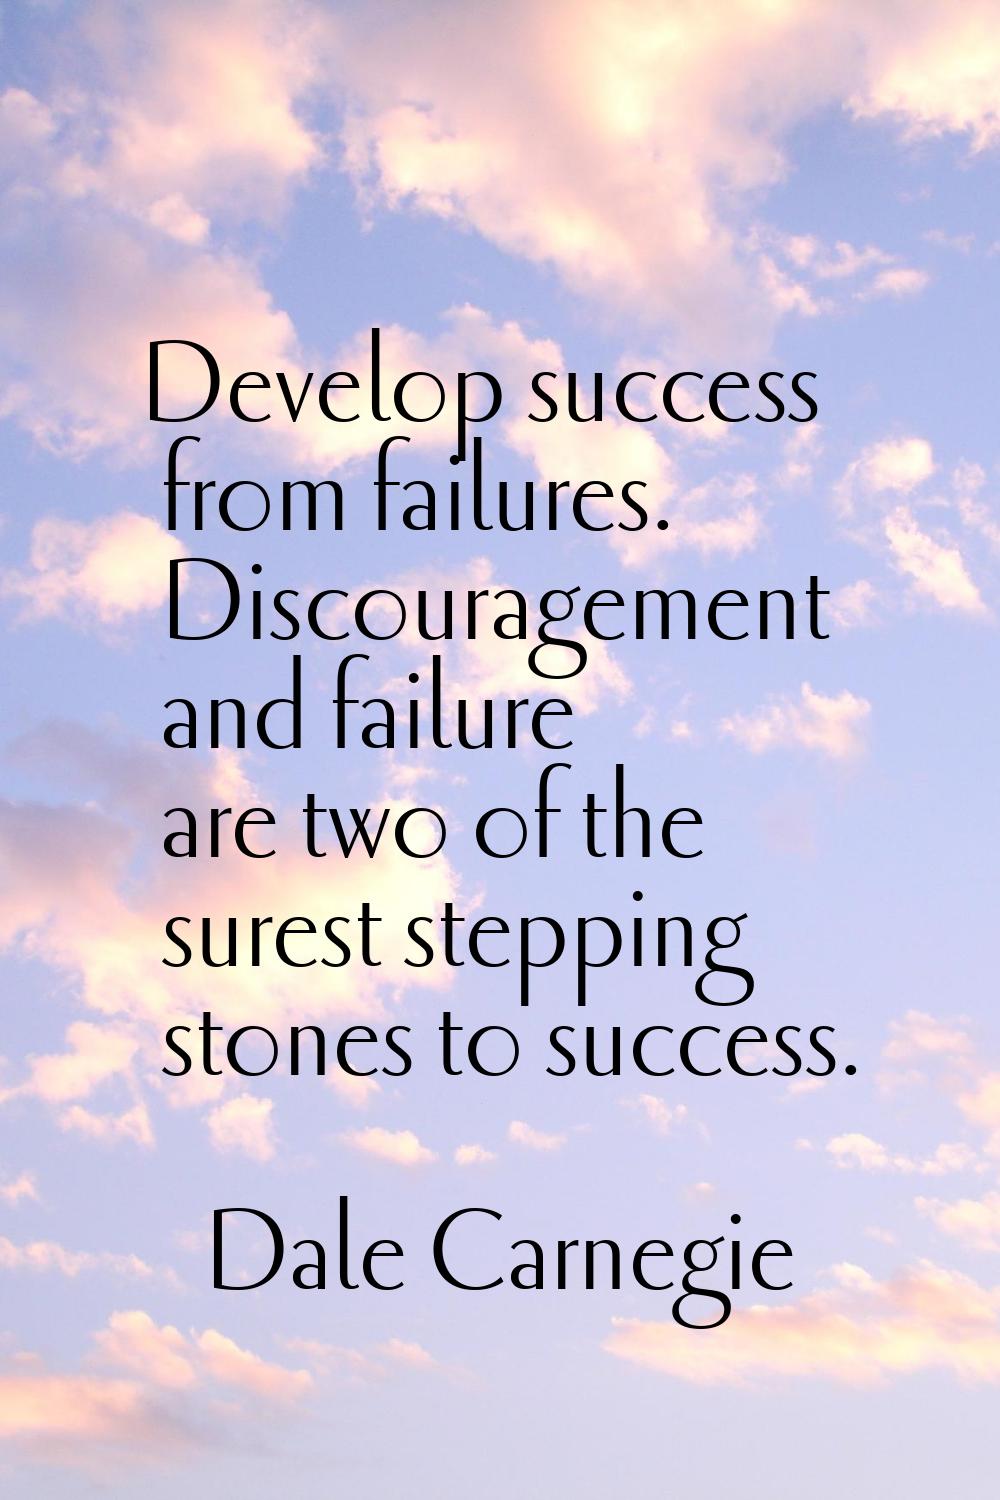 Develop success from failures. Discouragement and failure are two of the surest stepping stones to 